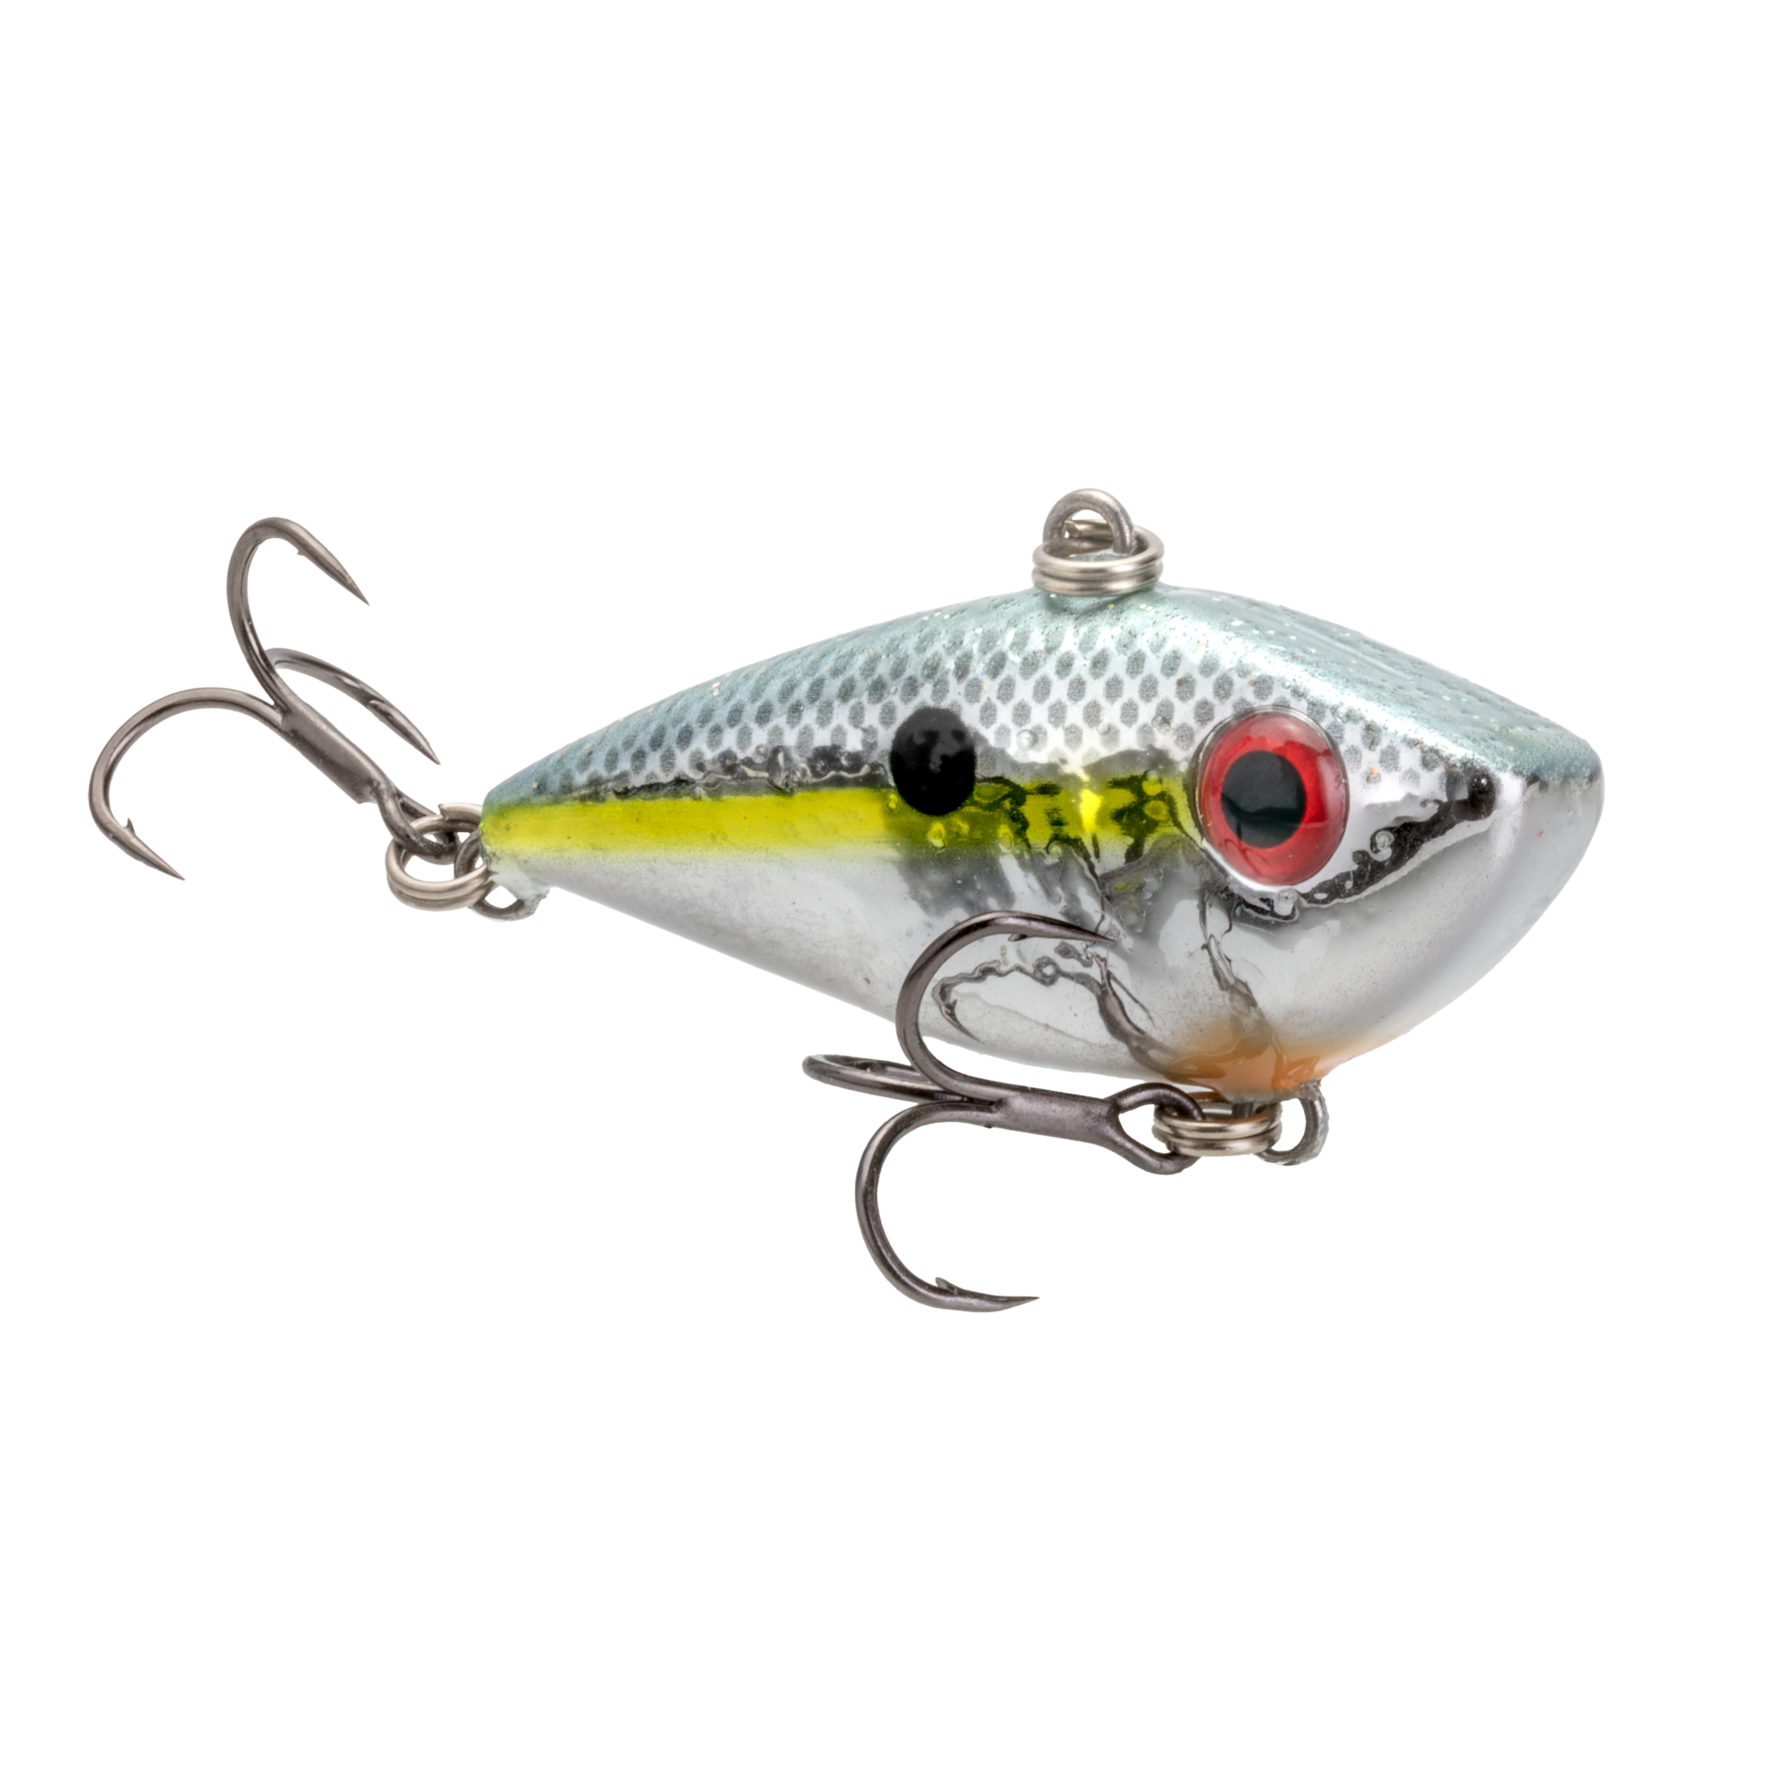 hollow body shad lure, hollow body shad lure Suppliers and Manufacturers at